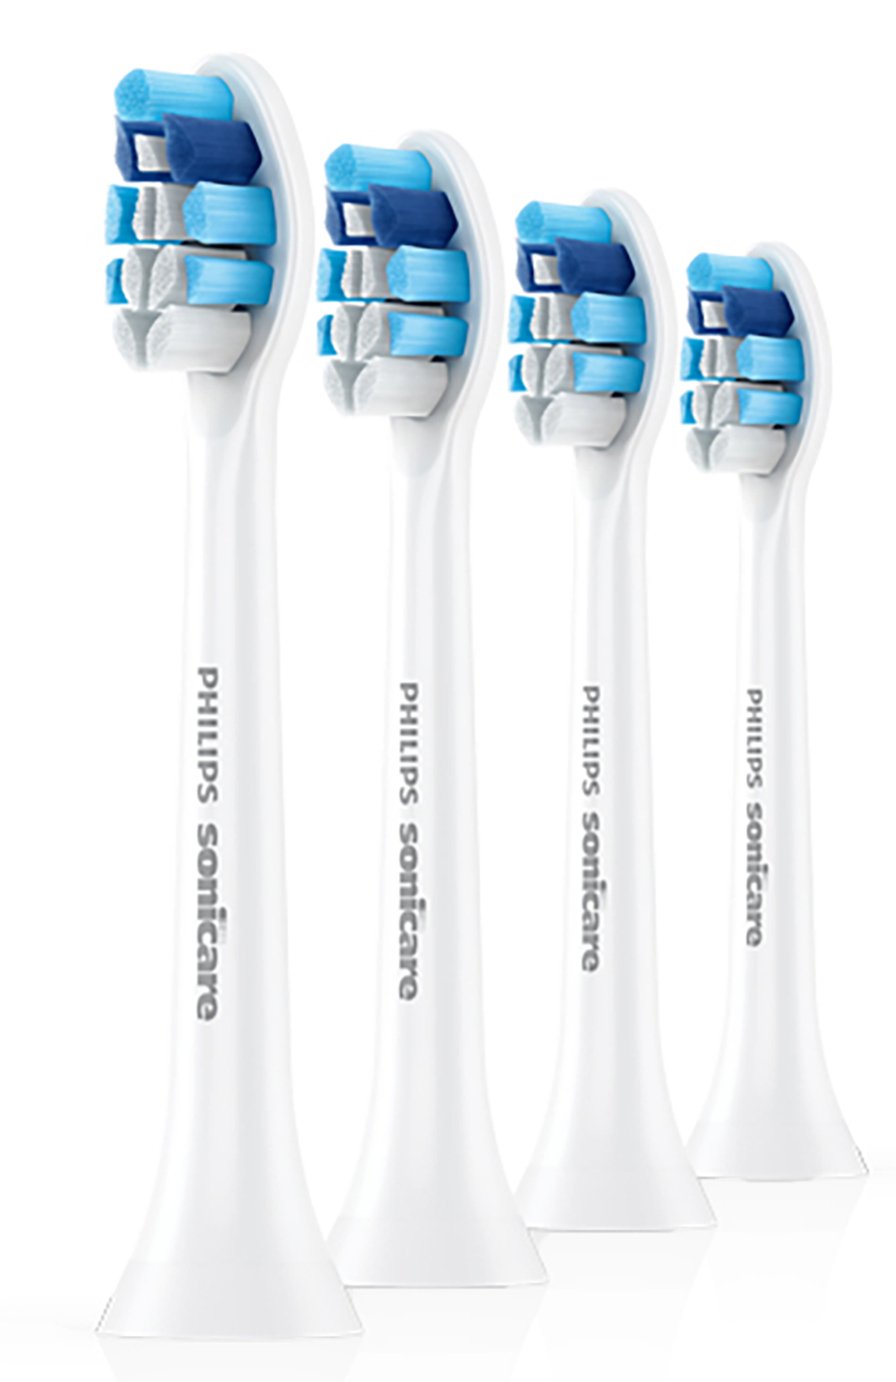 Philips Sonicare Optimal Gum Electric Toothbrush Heads -4 Pk